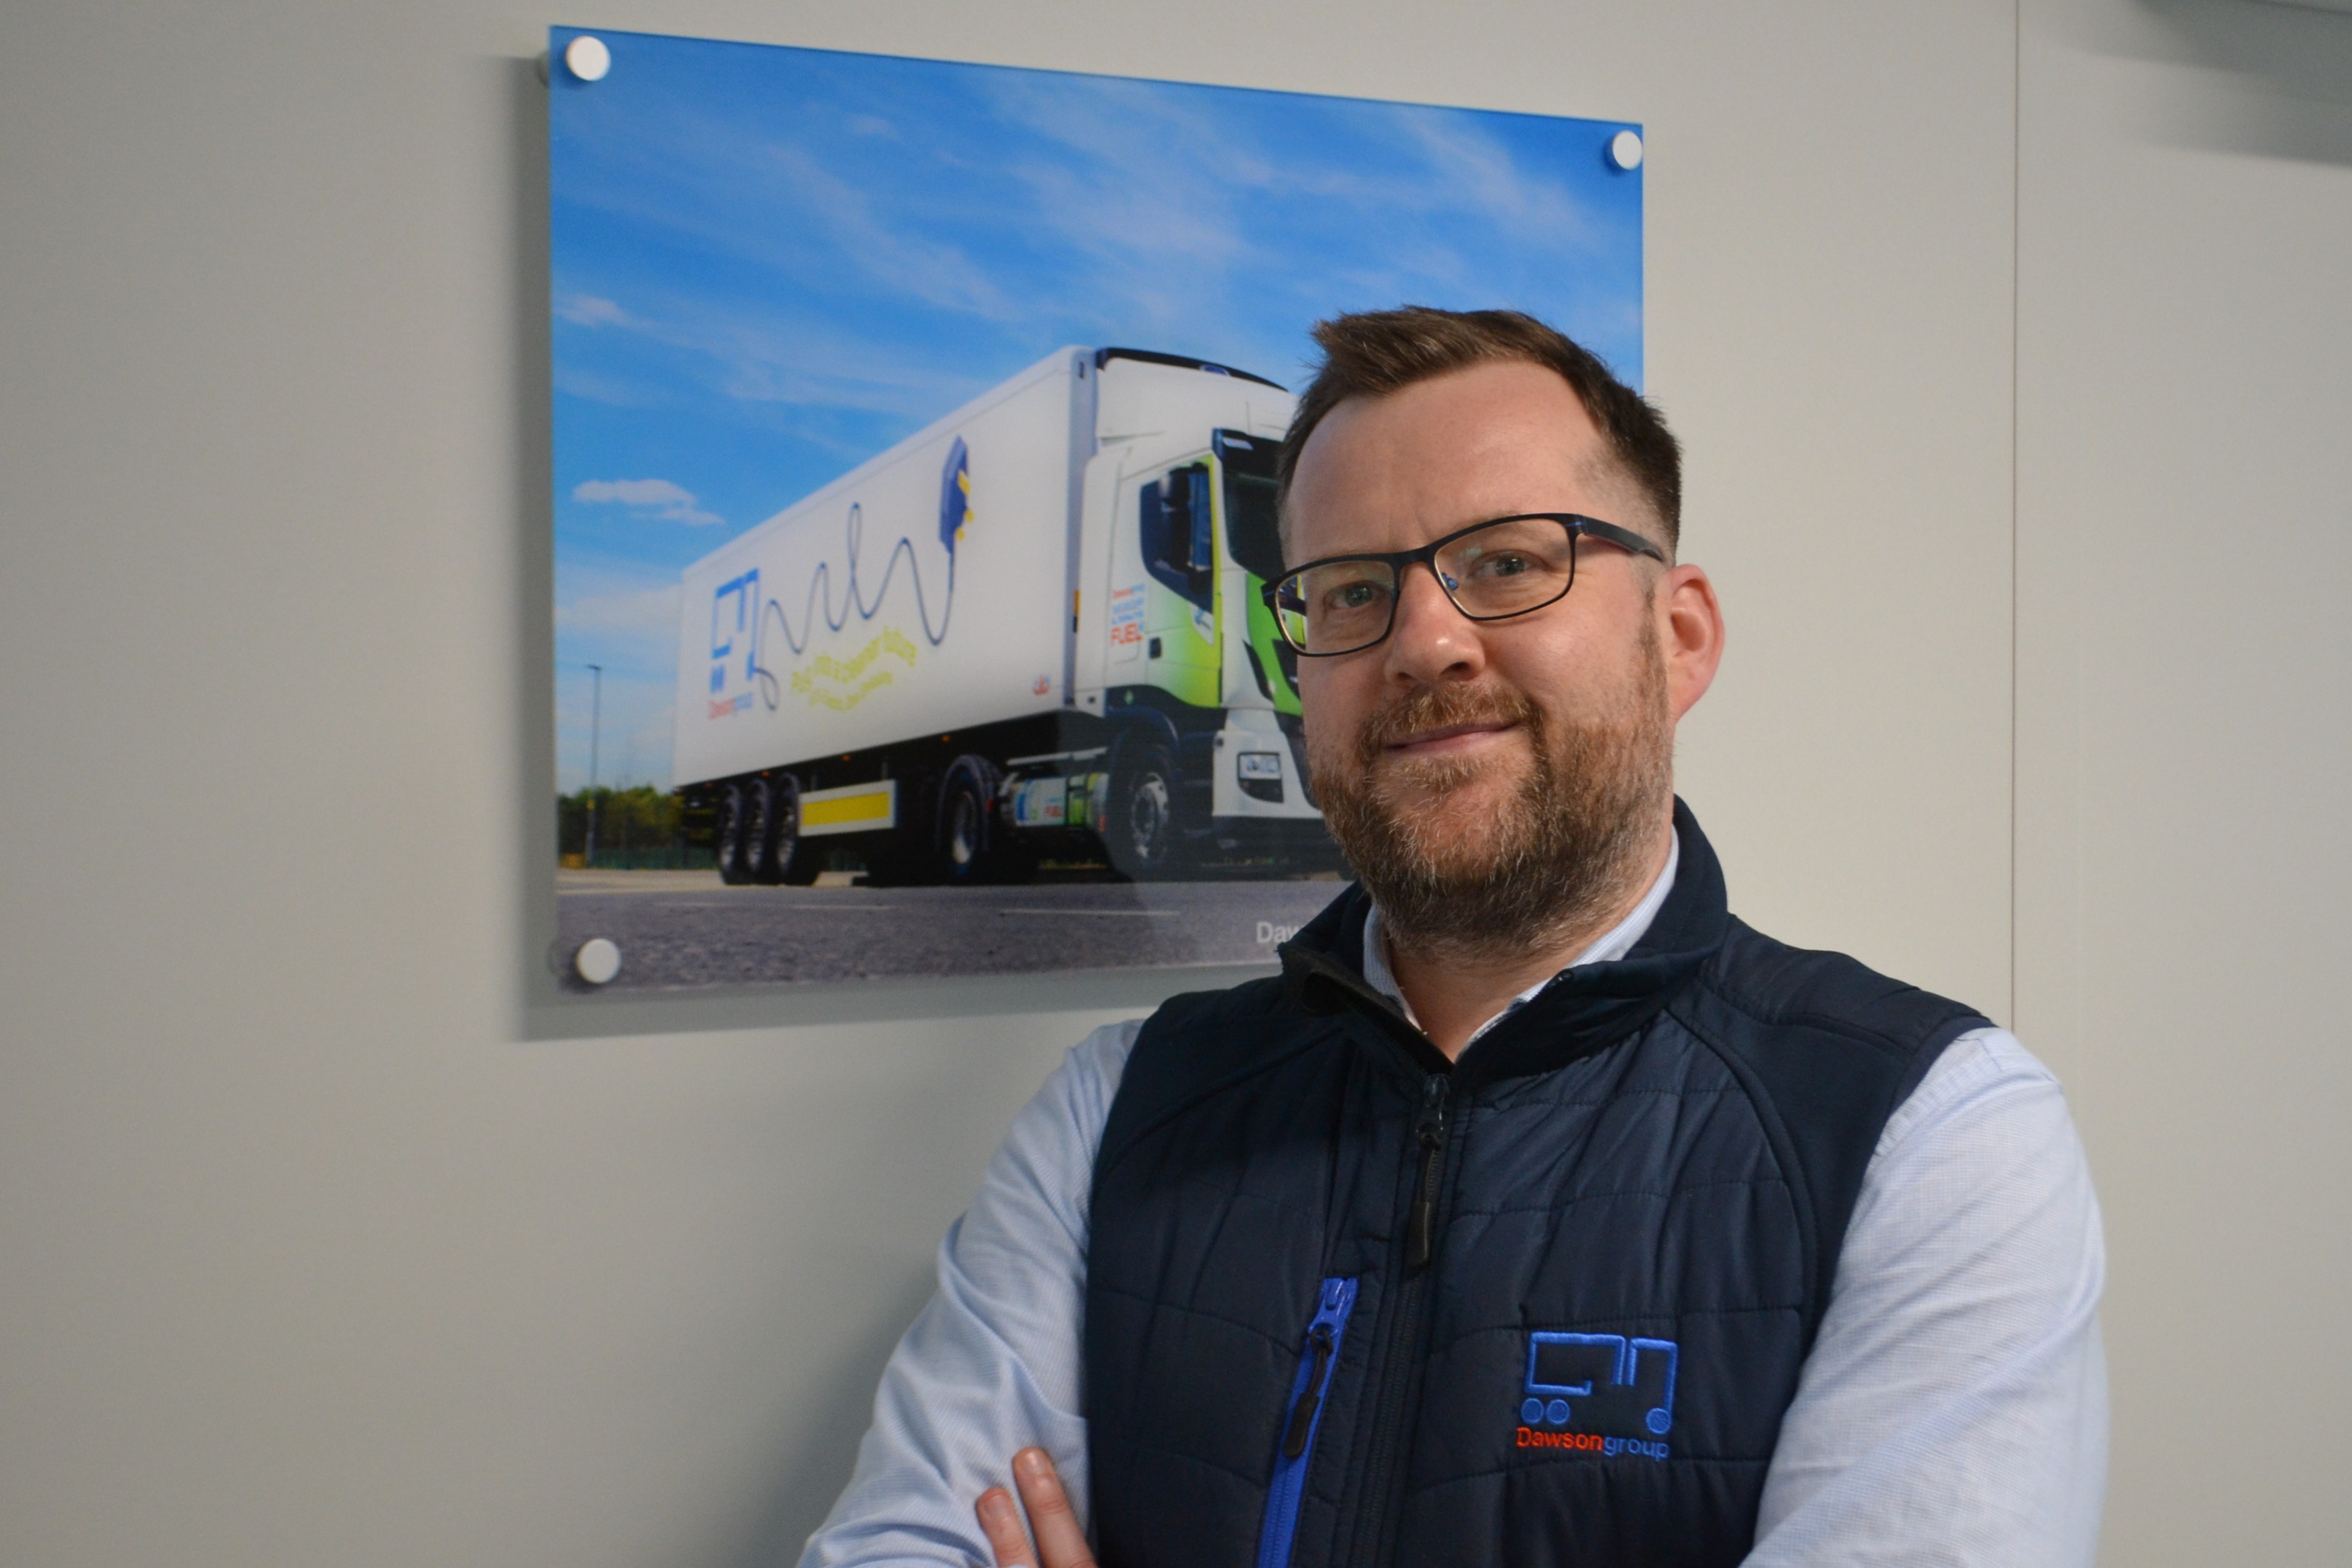 Stuart Gray, standing in front of a Dawsongroup truck and trailer image.